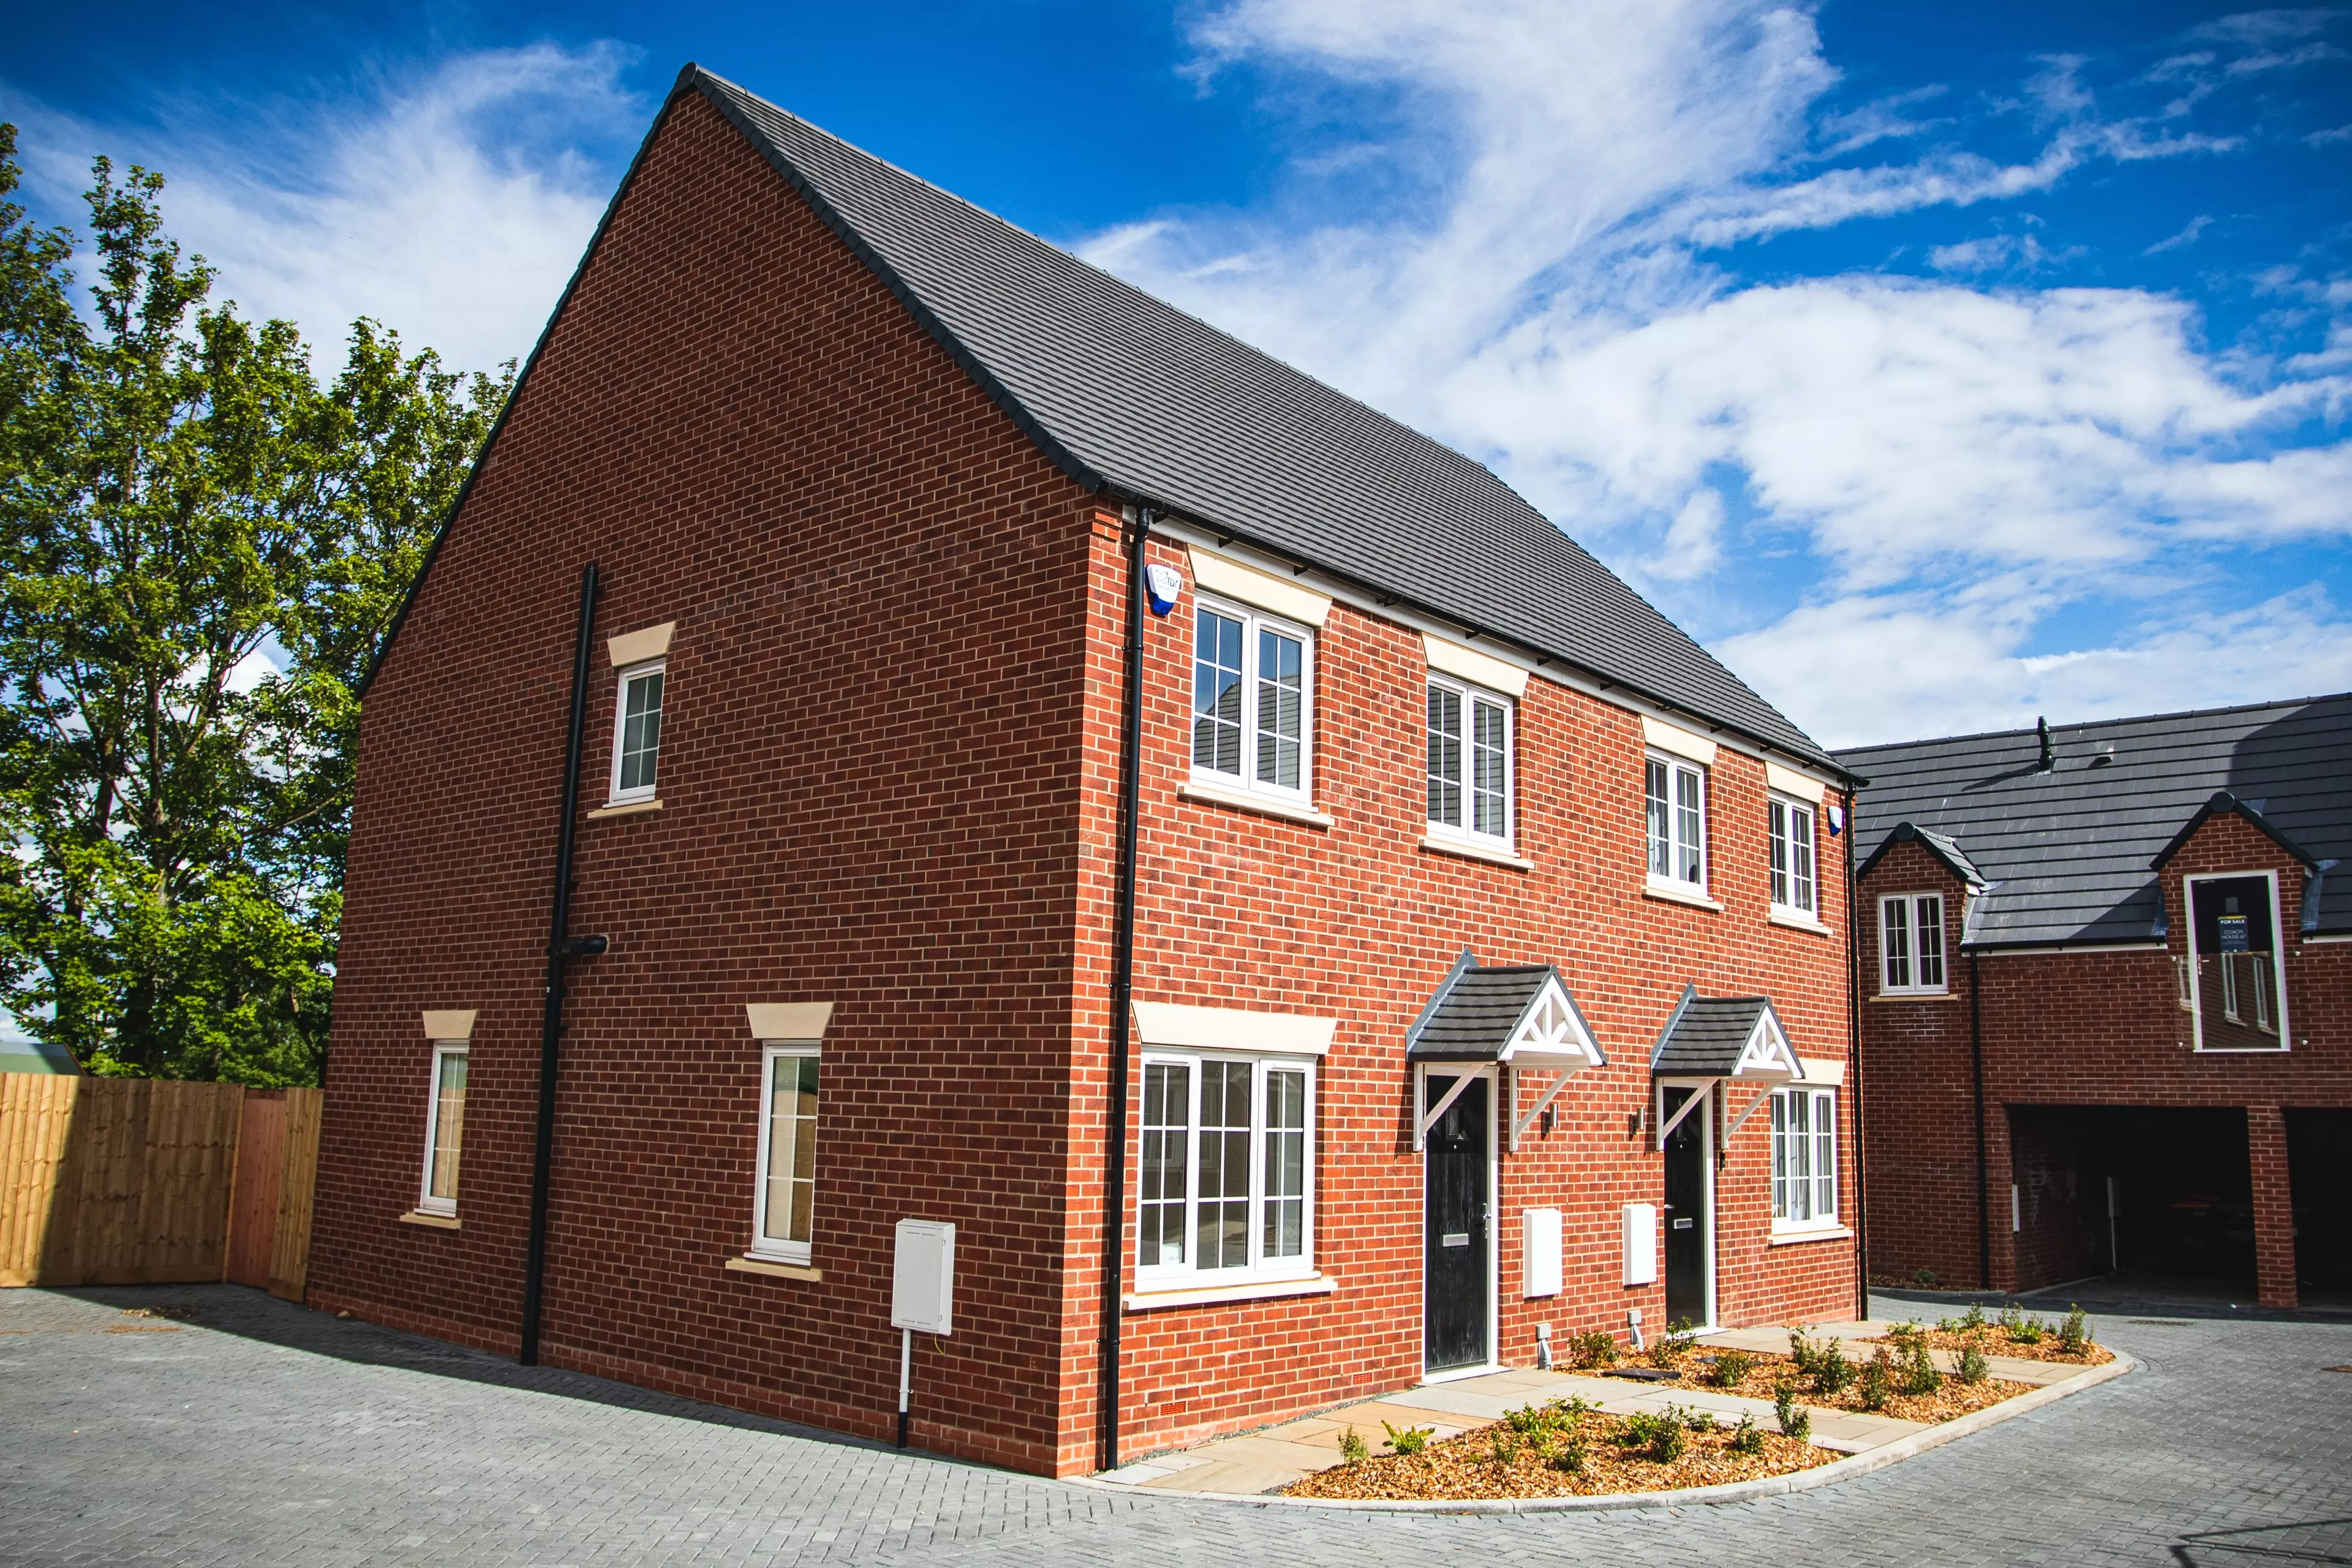 New builds often appeal to first time buyers (